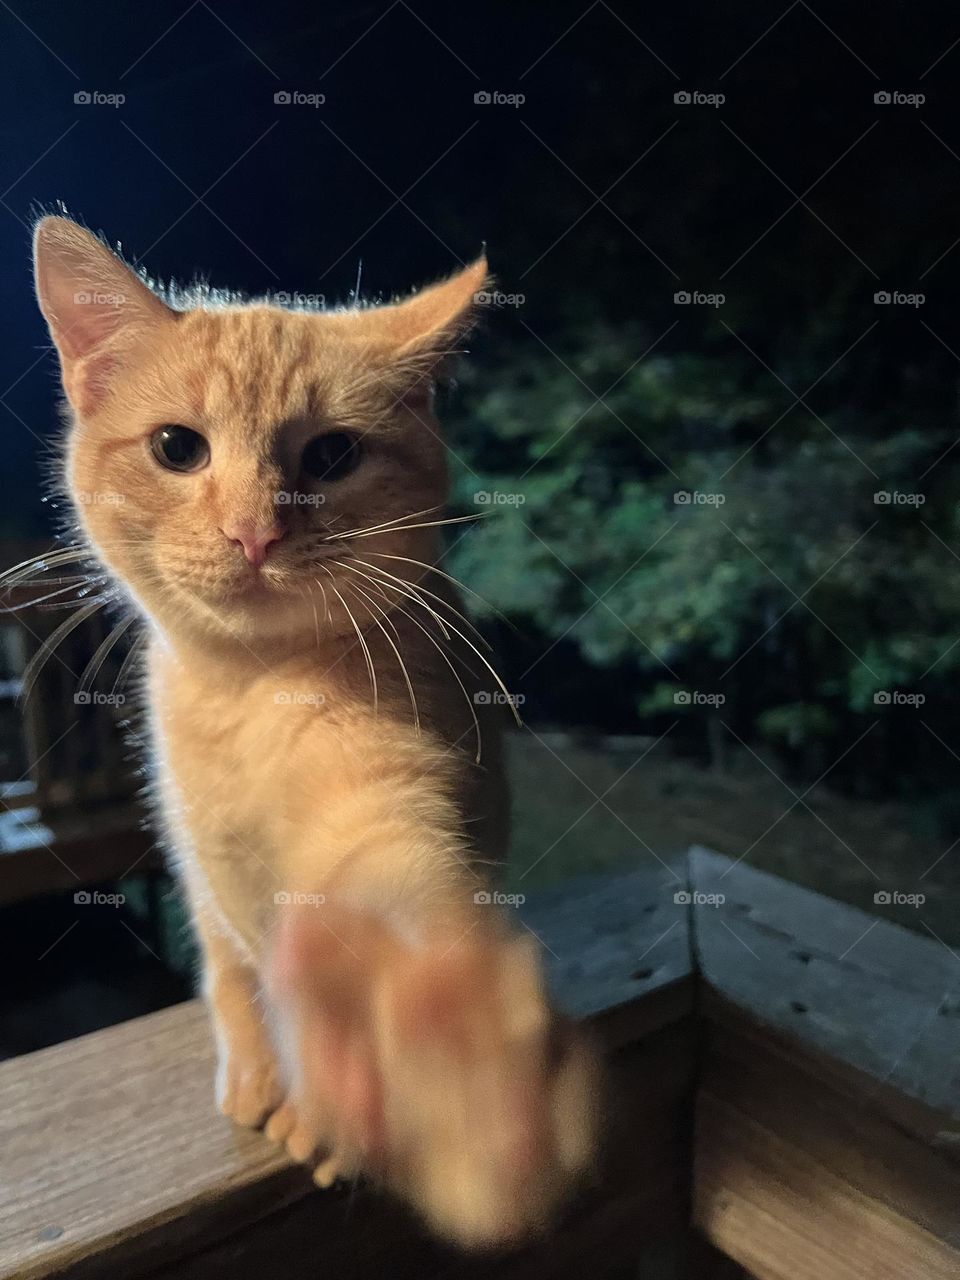 Put down the camera and pet me